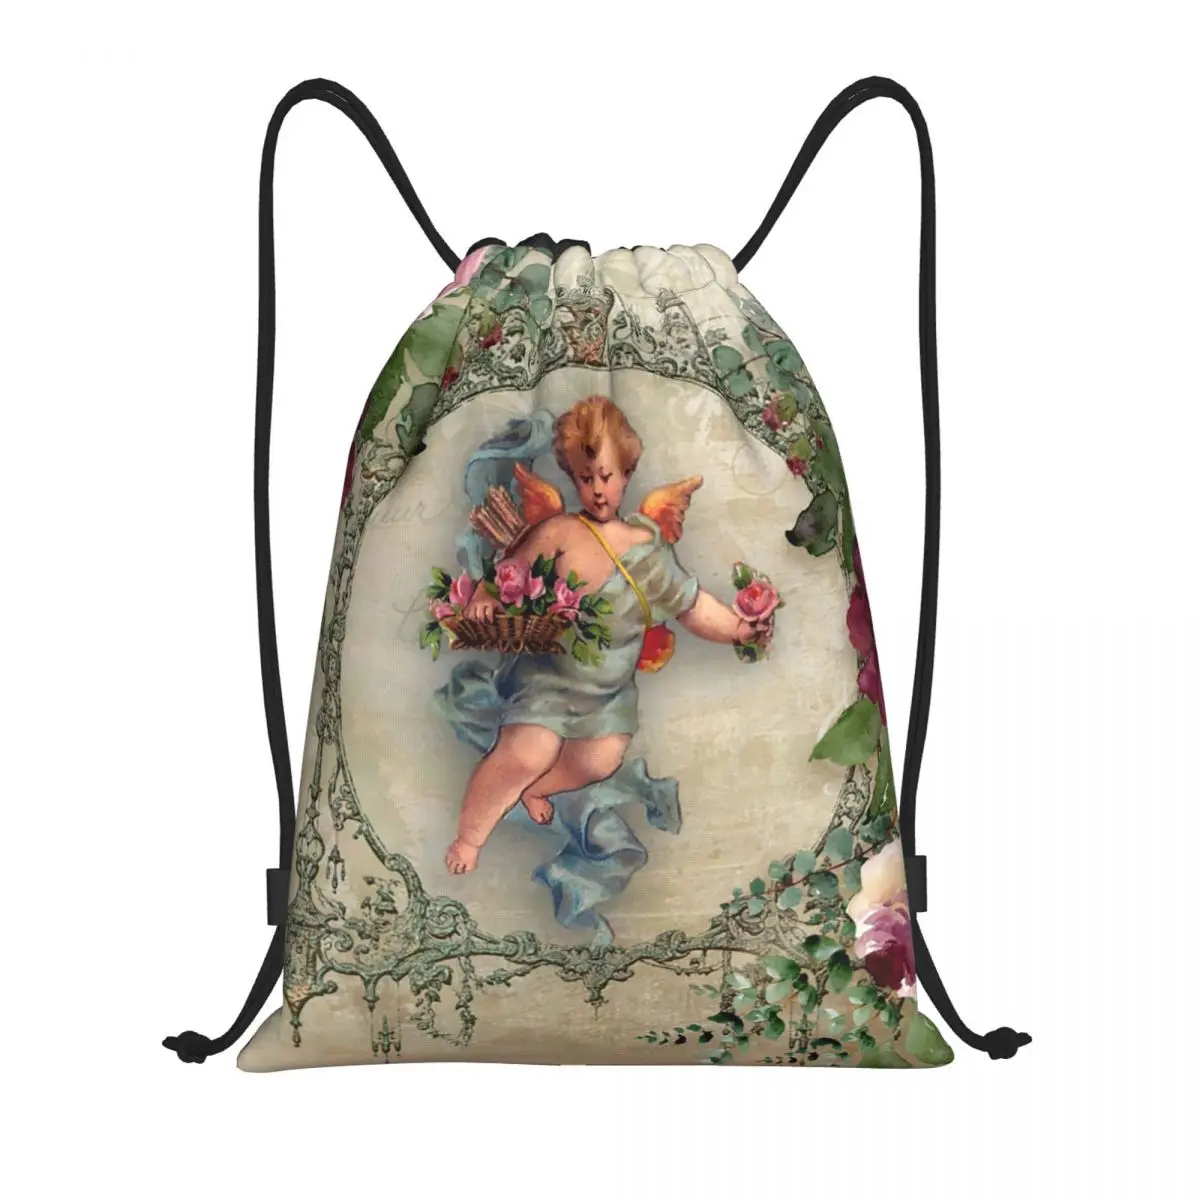 

Victorian Angel Print With Vintage Rose Bouquets Shabby Chic Drawstring Backpack Gym Sport Sackpack Foldable Training Bag Sack